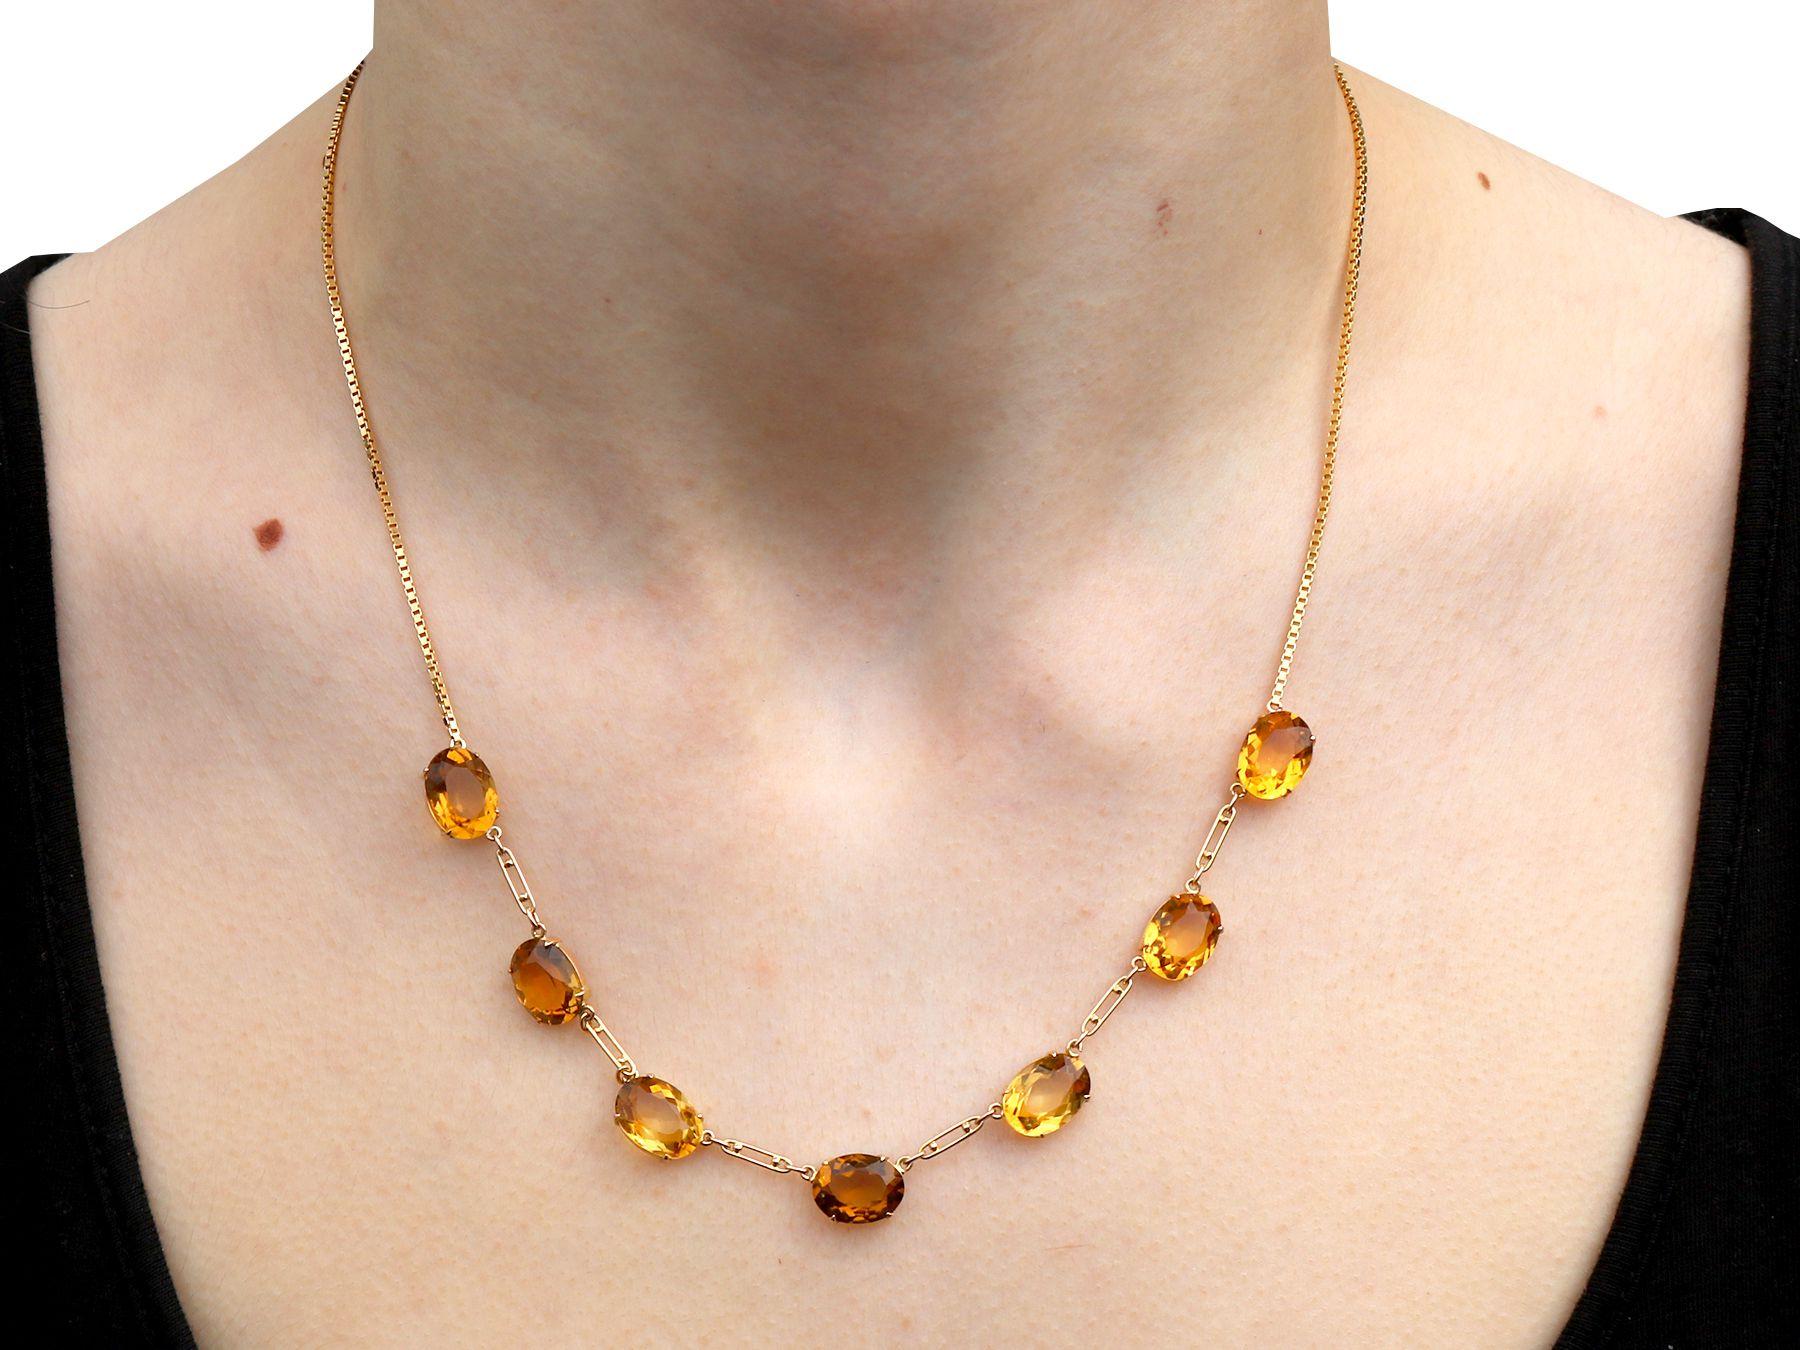 Vintage 24.57ct Citrine and 9ct Yellow Gold Necklace For Sale 1